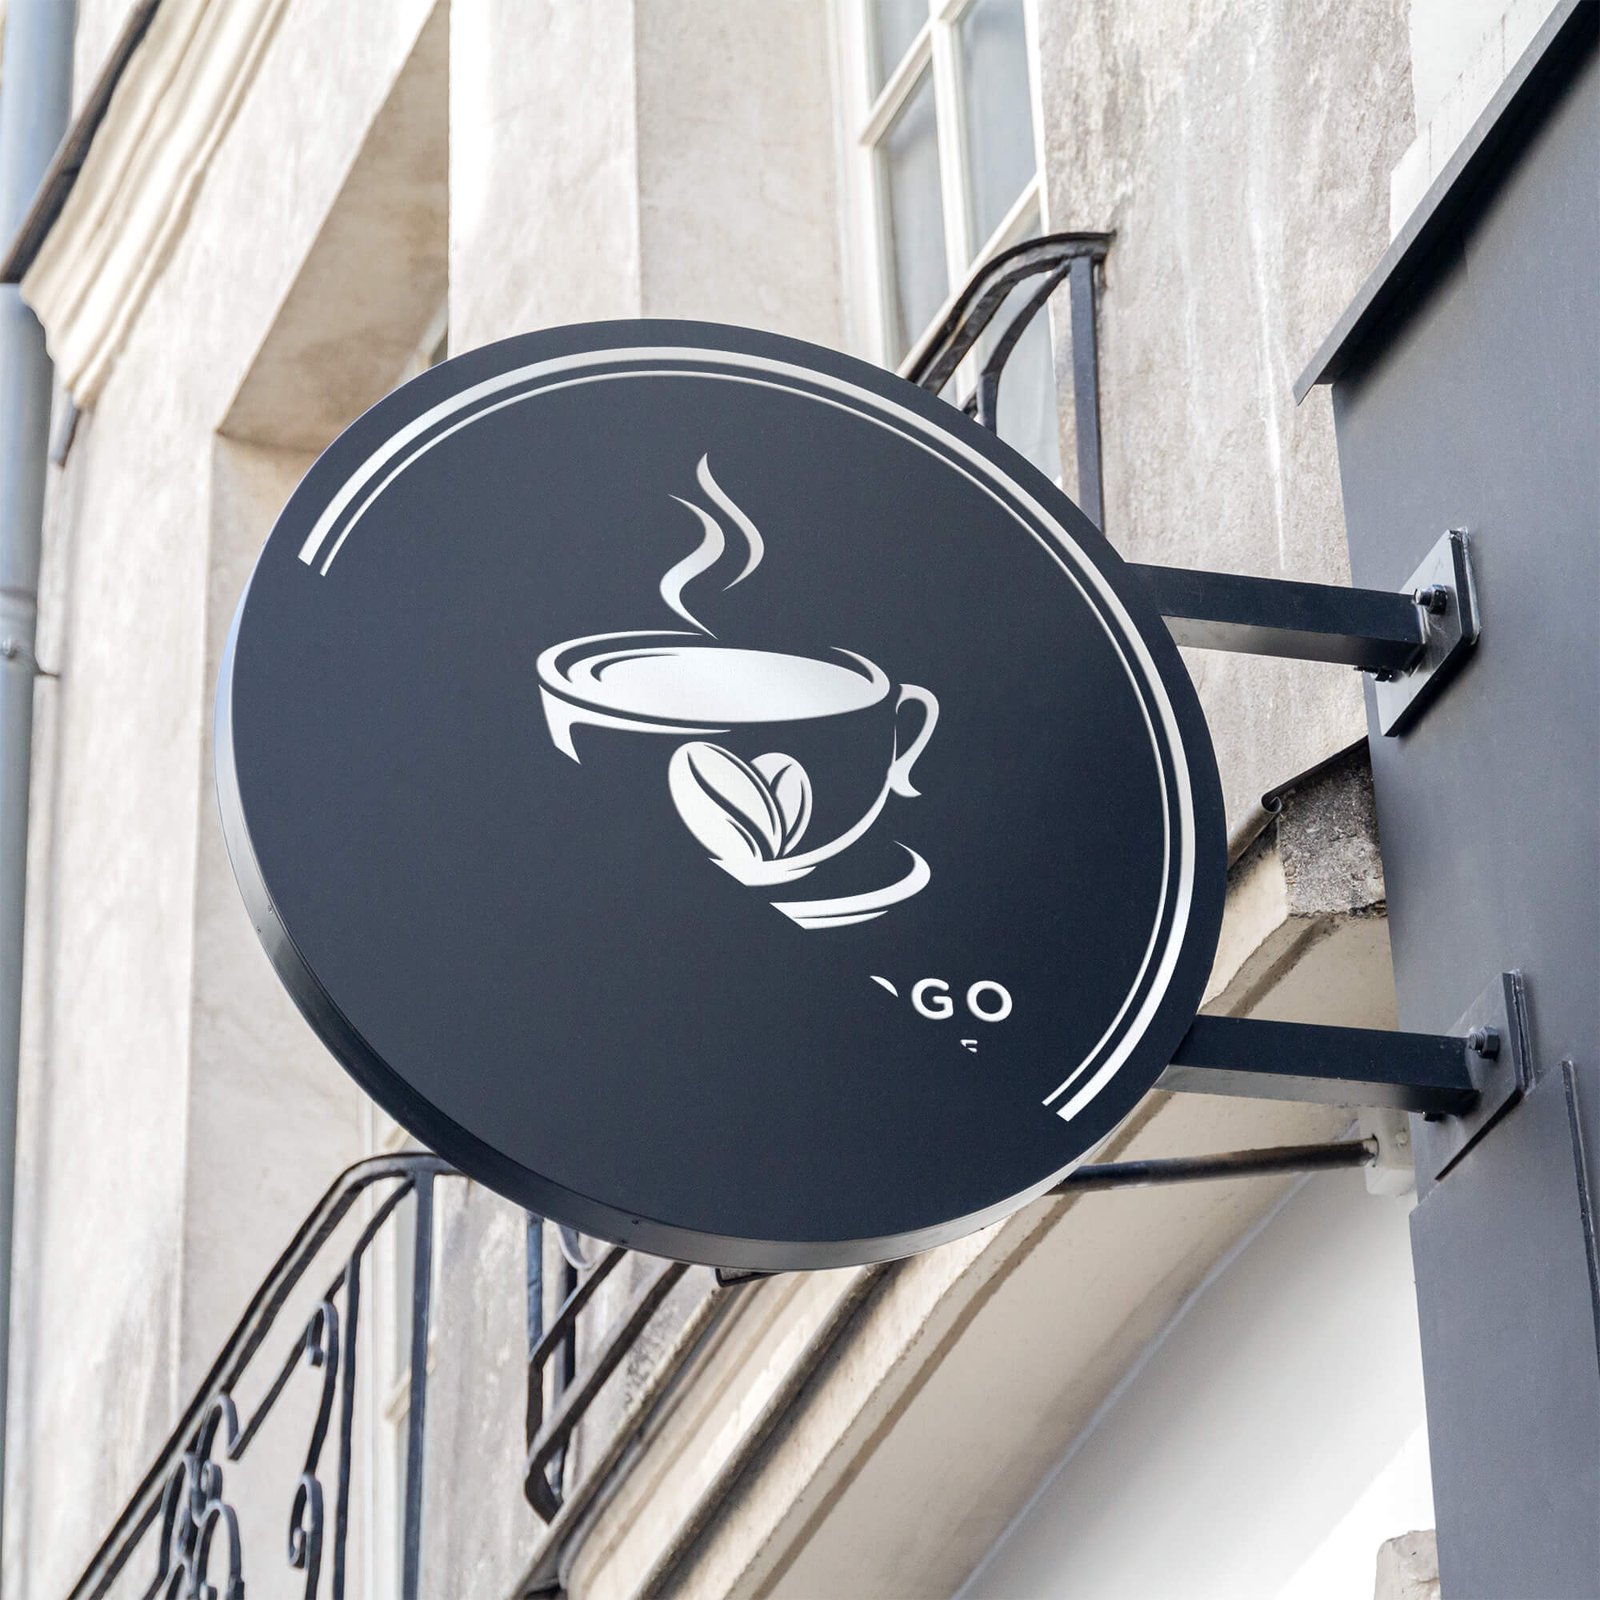 Editable Free Cafe Round Signboard Mockup PSD Template